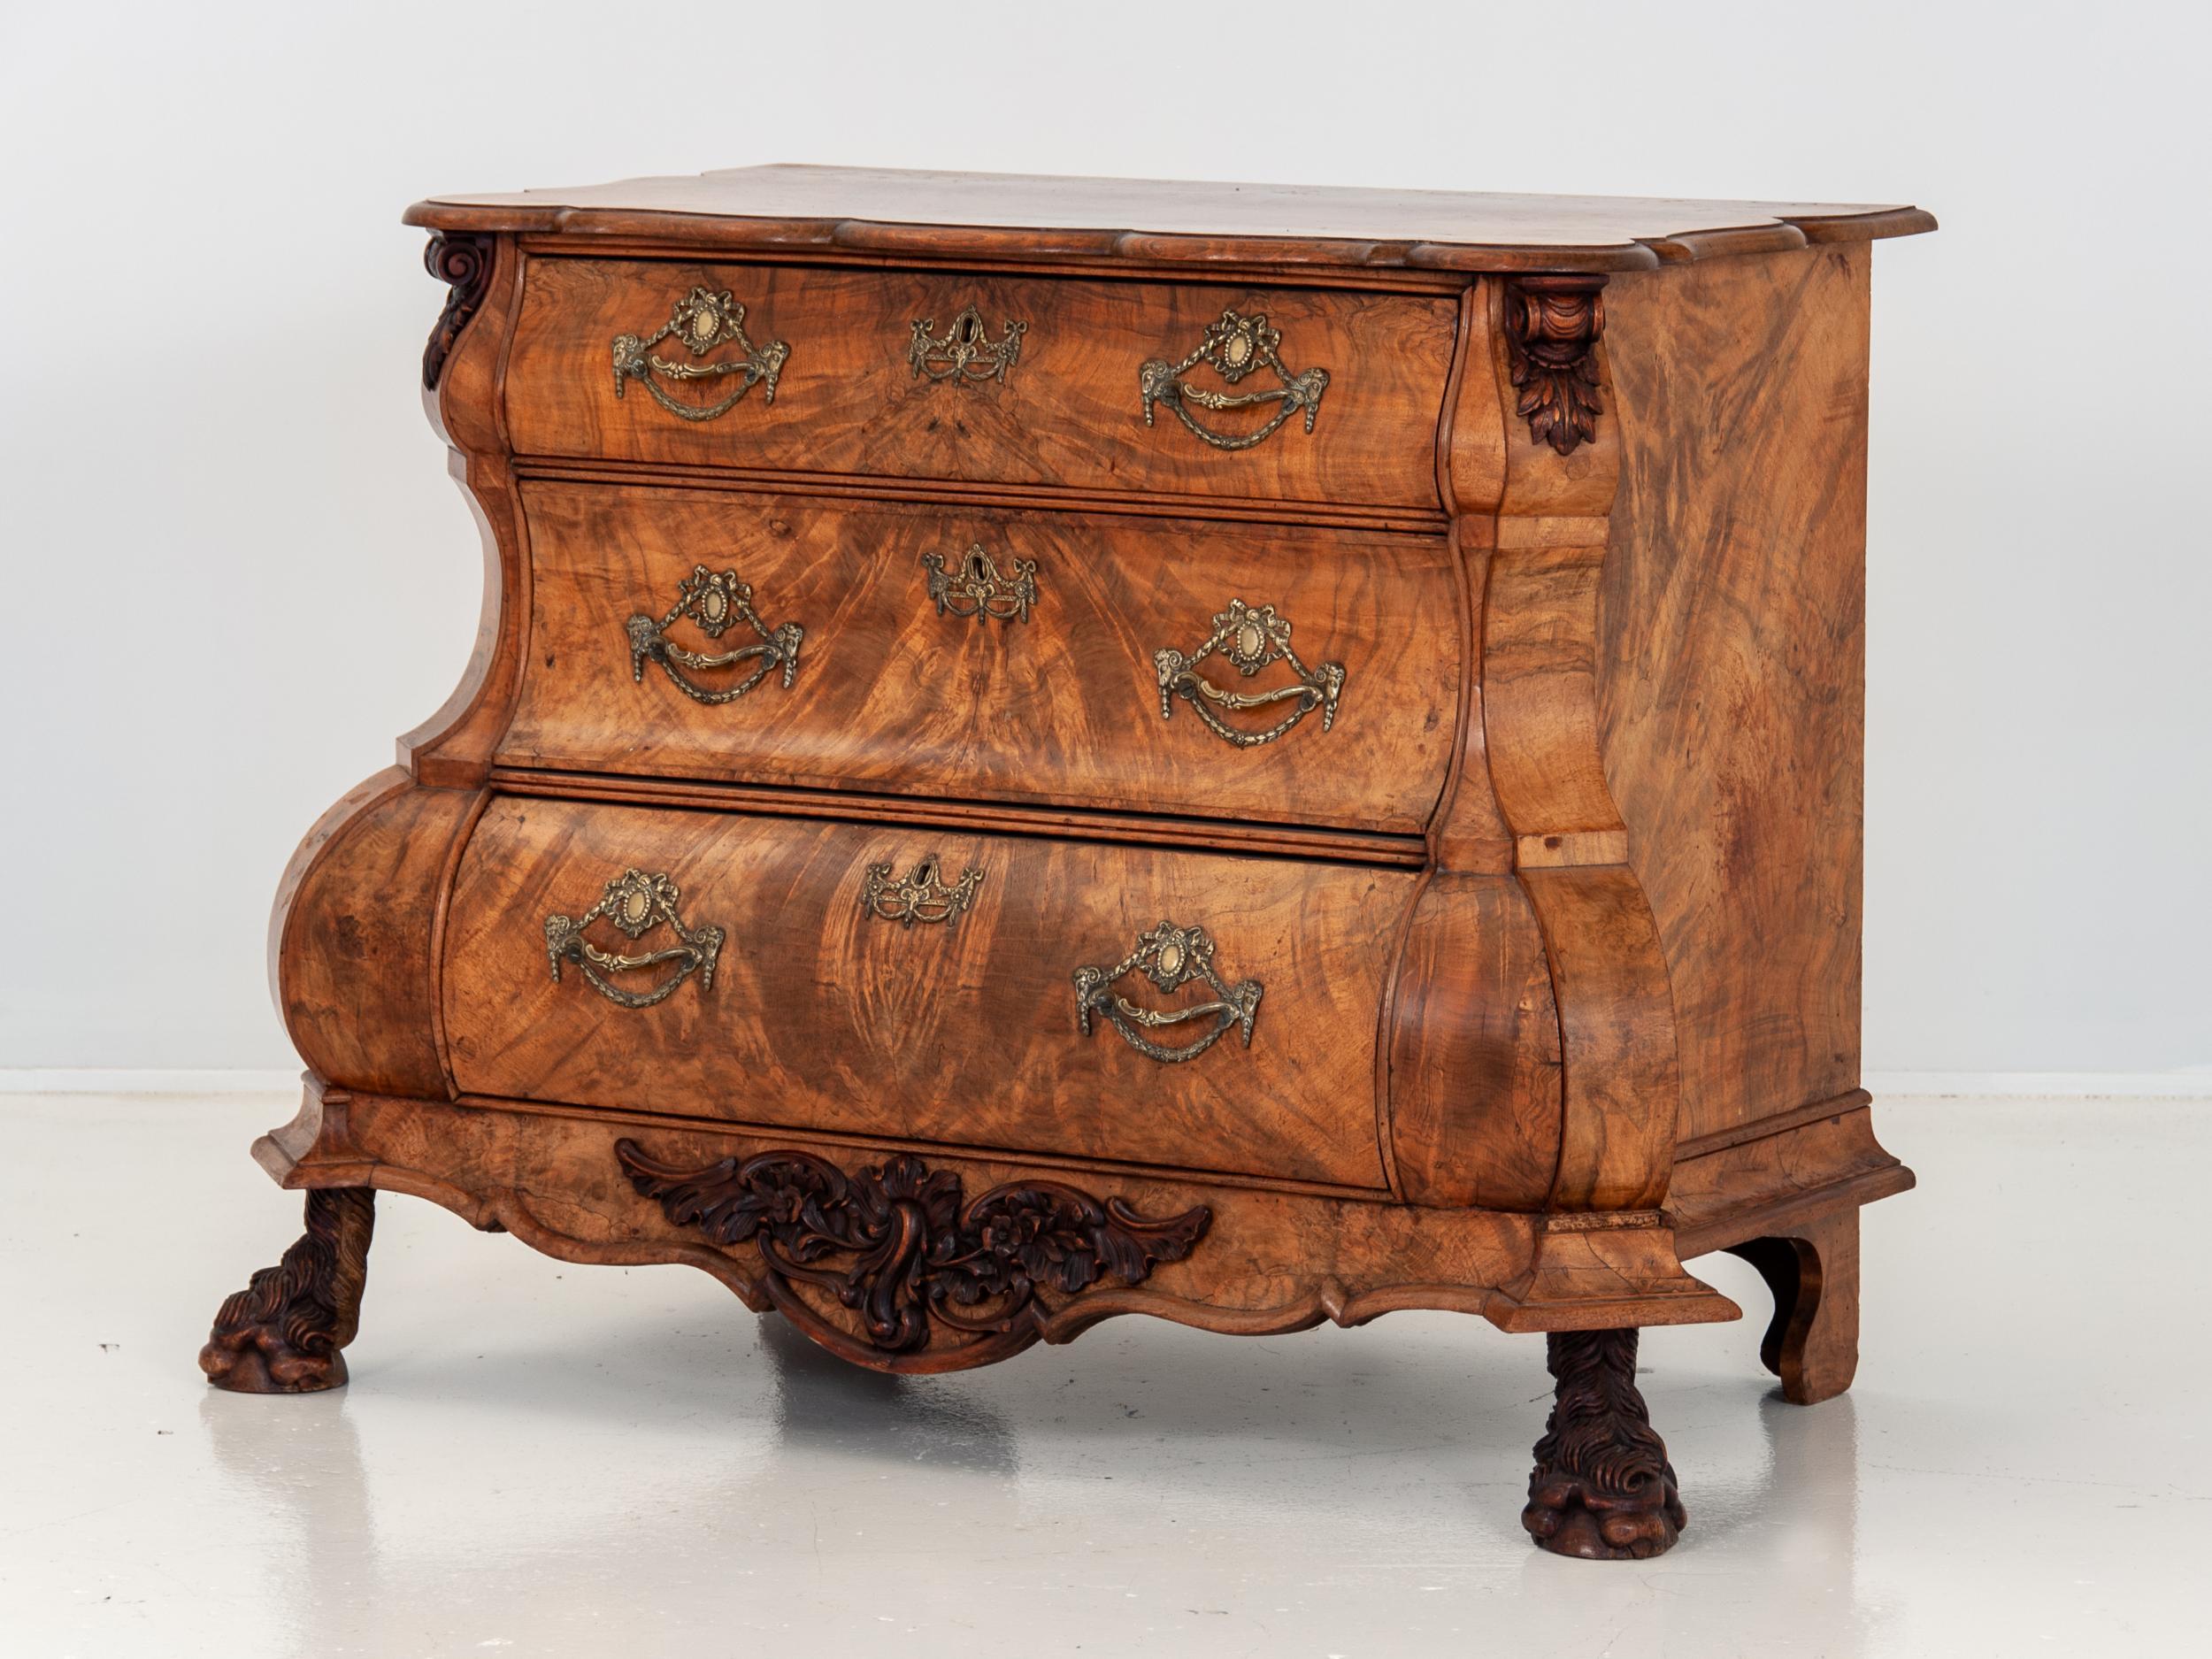 Stunning antique late 19th century Dutch bombe or dresser made in the Netherlands in the late 19th century. Sinuous serpentine silhouette in a beautiful book-matched veneer. Carved acanthus leaf details with exquisitely carved paw feet. Dresser is